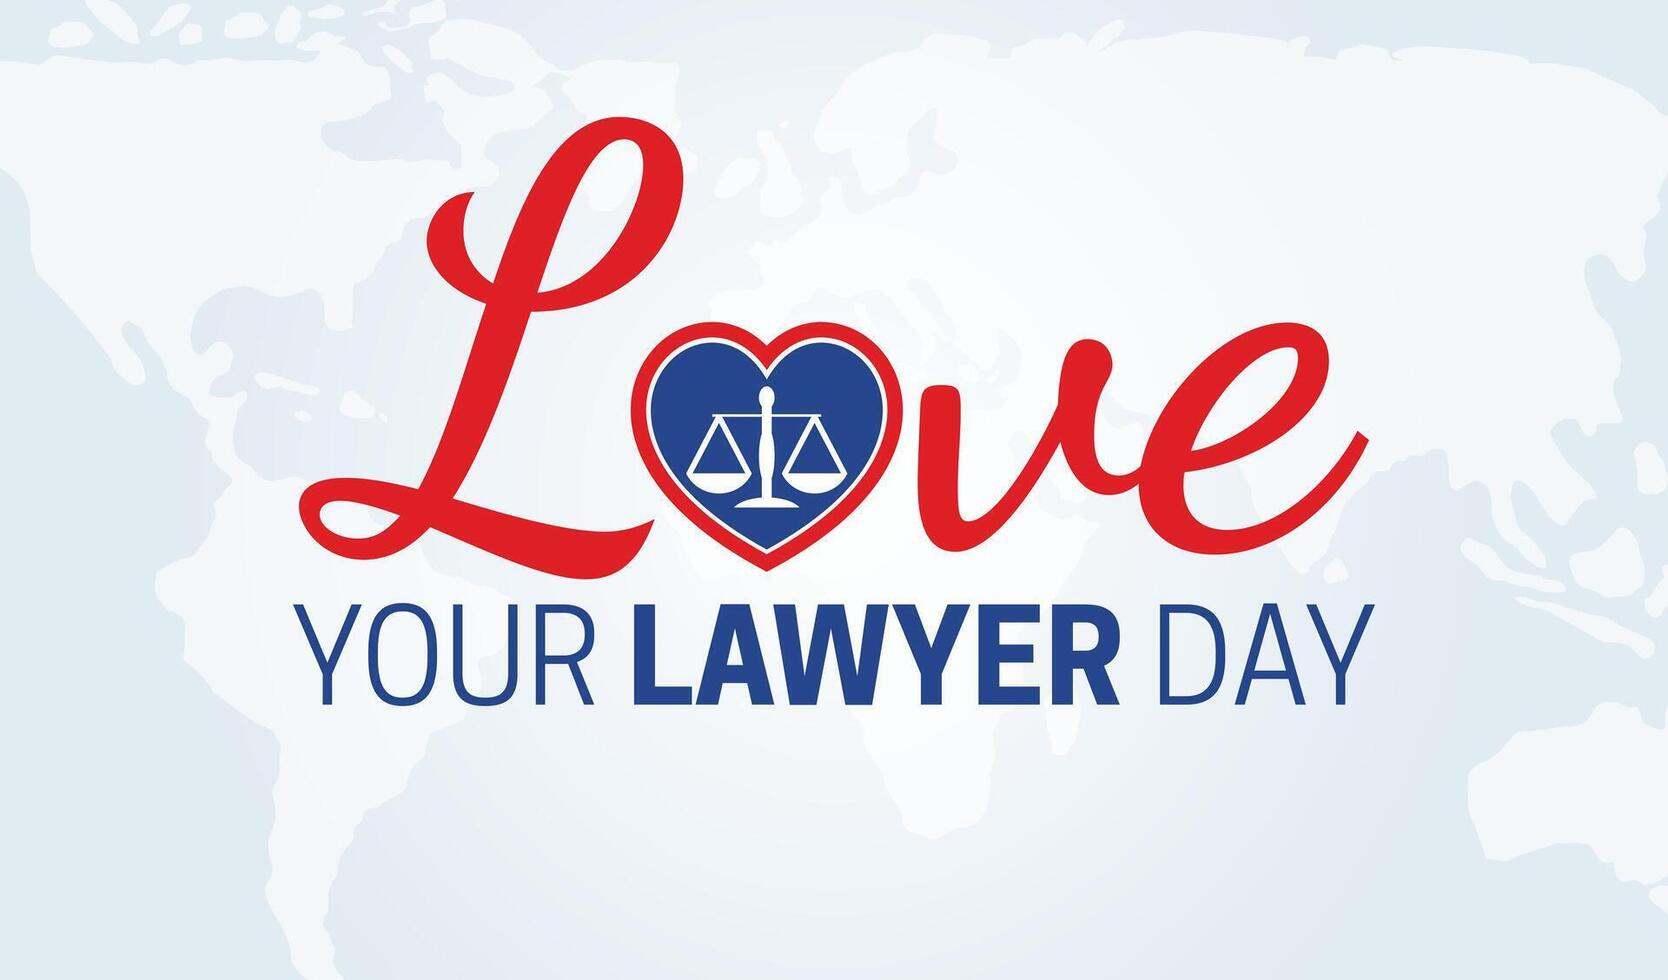 Love Your Lawyer Day Background Illustration vector